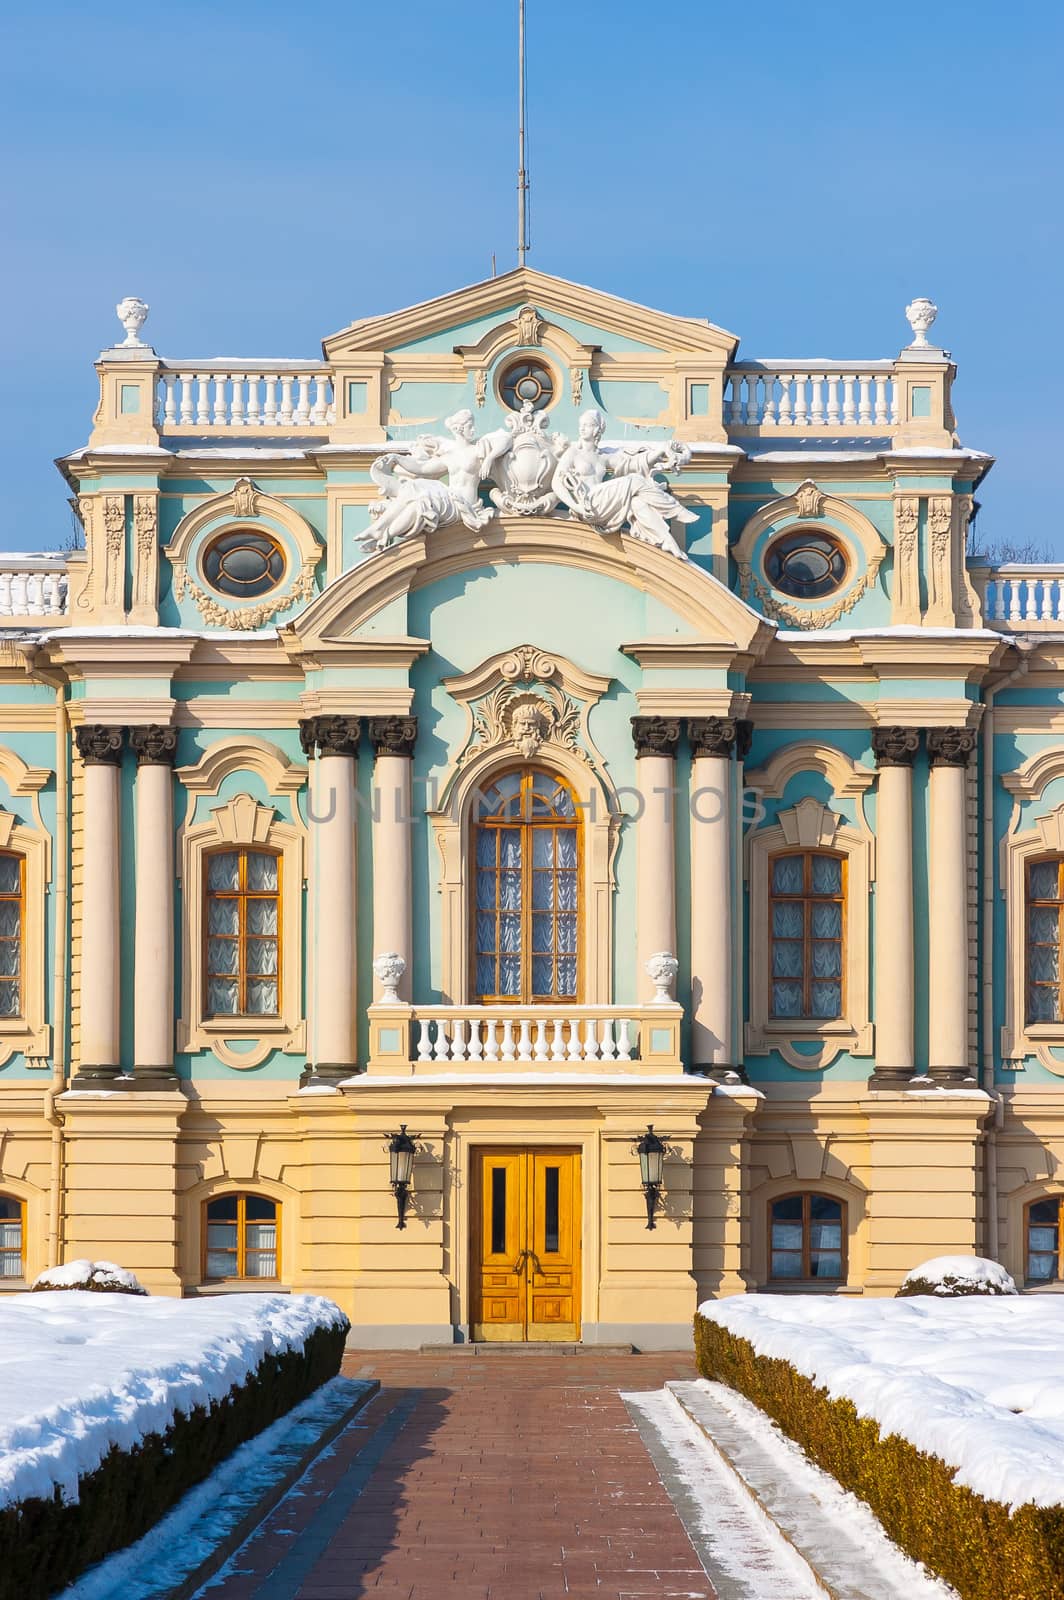 The Mariinsky palace in Kiev, during winter with snow